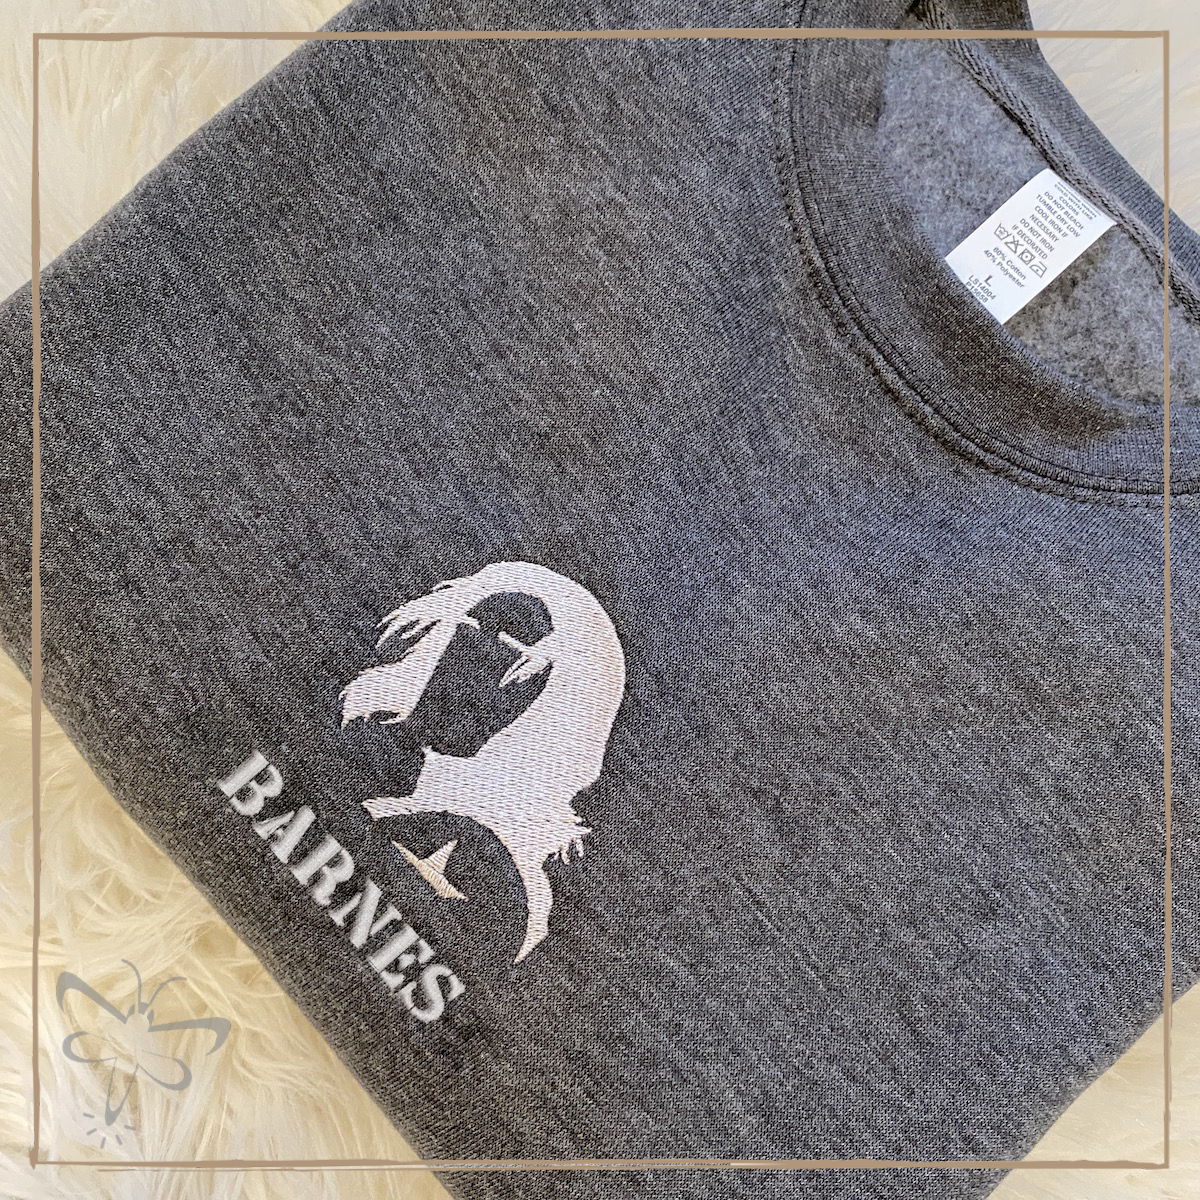 Barnes Embroidered Crewneck Xs / Charcoal Heather Sweater